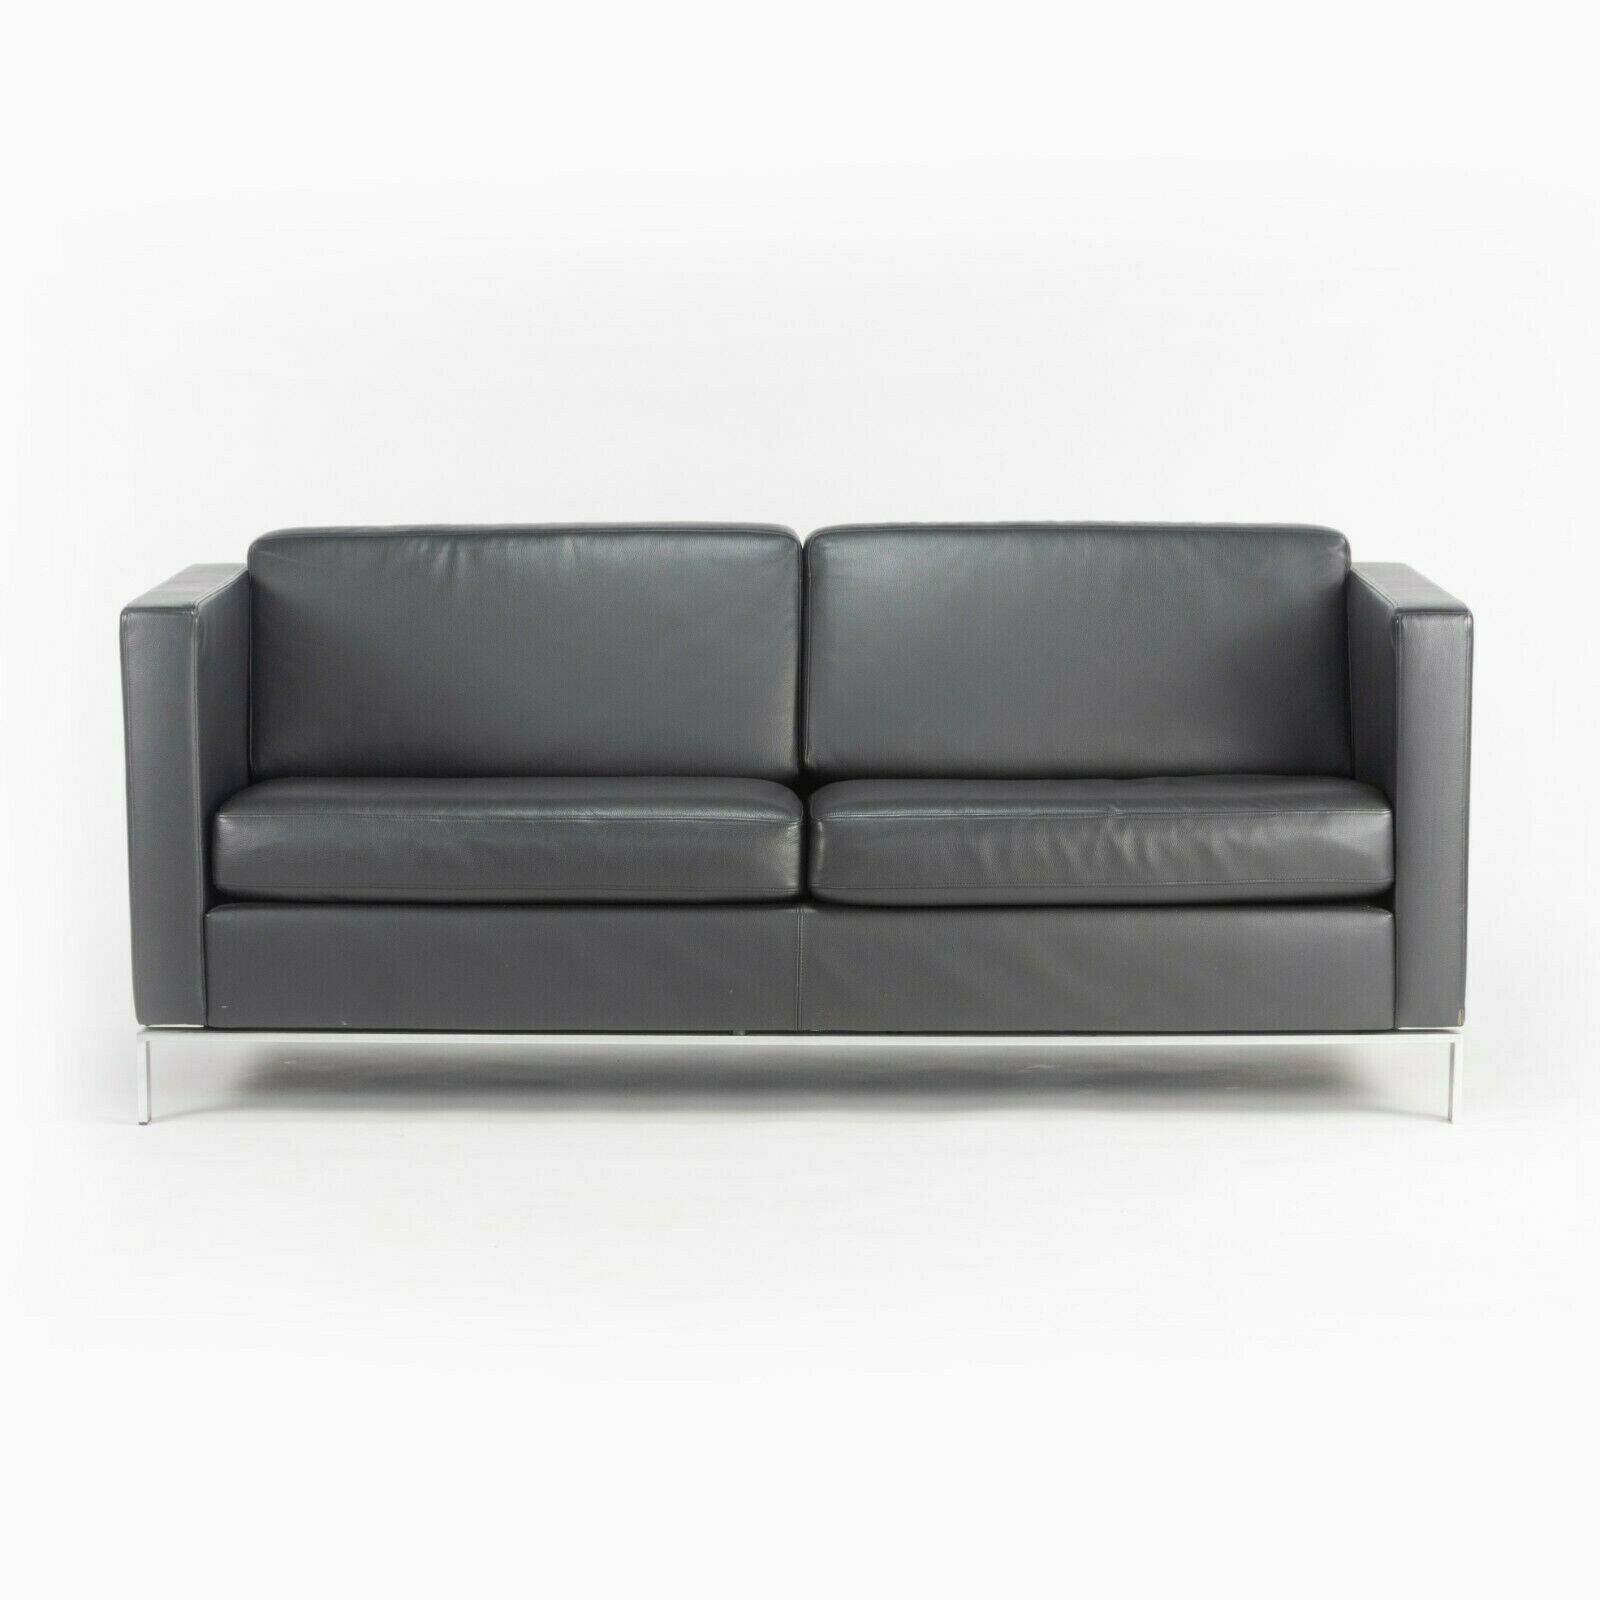 Lord Norman Foster Model 500 Black Leather 2 Seat Settee Sofa for Walter Knoll For Sale 3